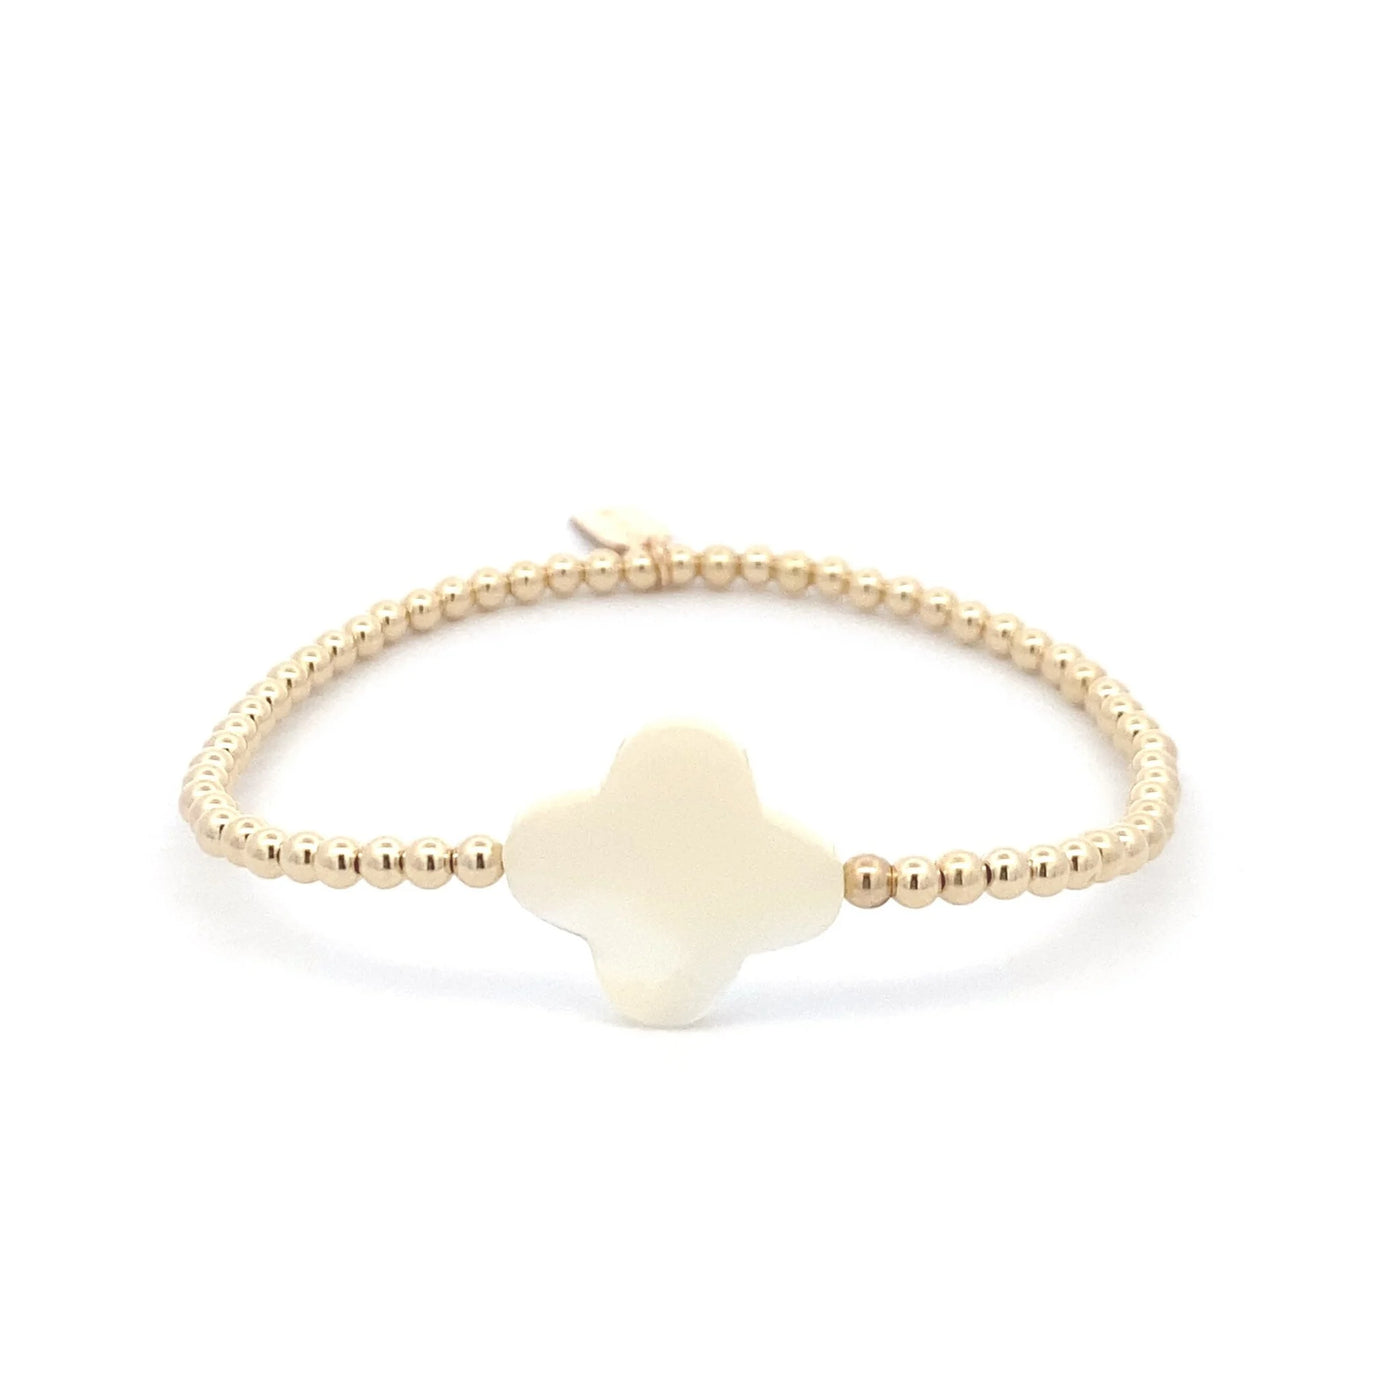 pscallme armband clover pearl gold